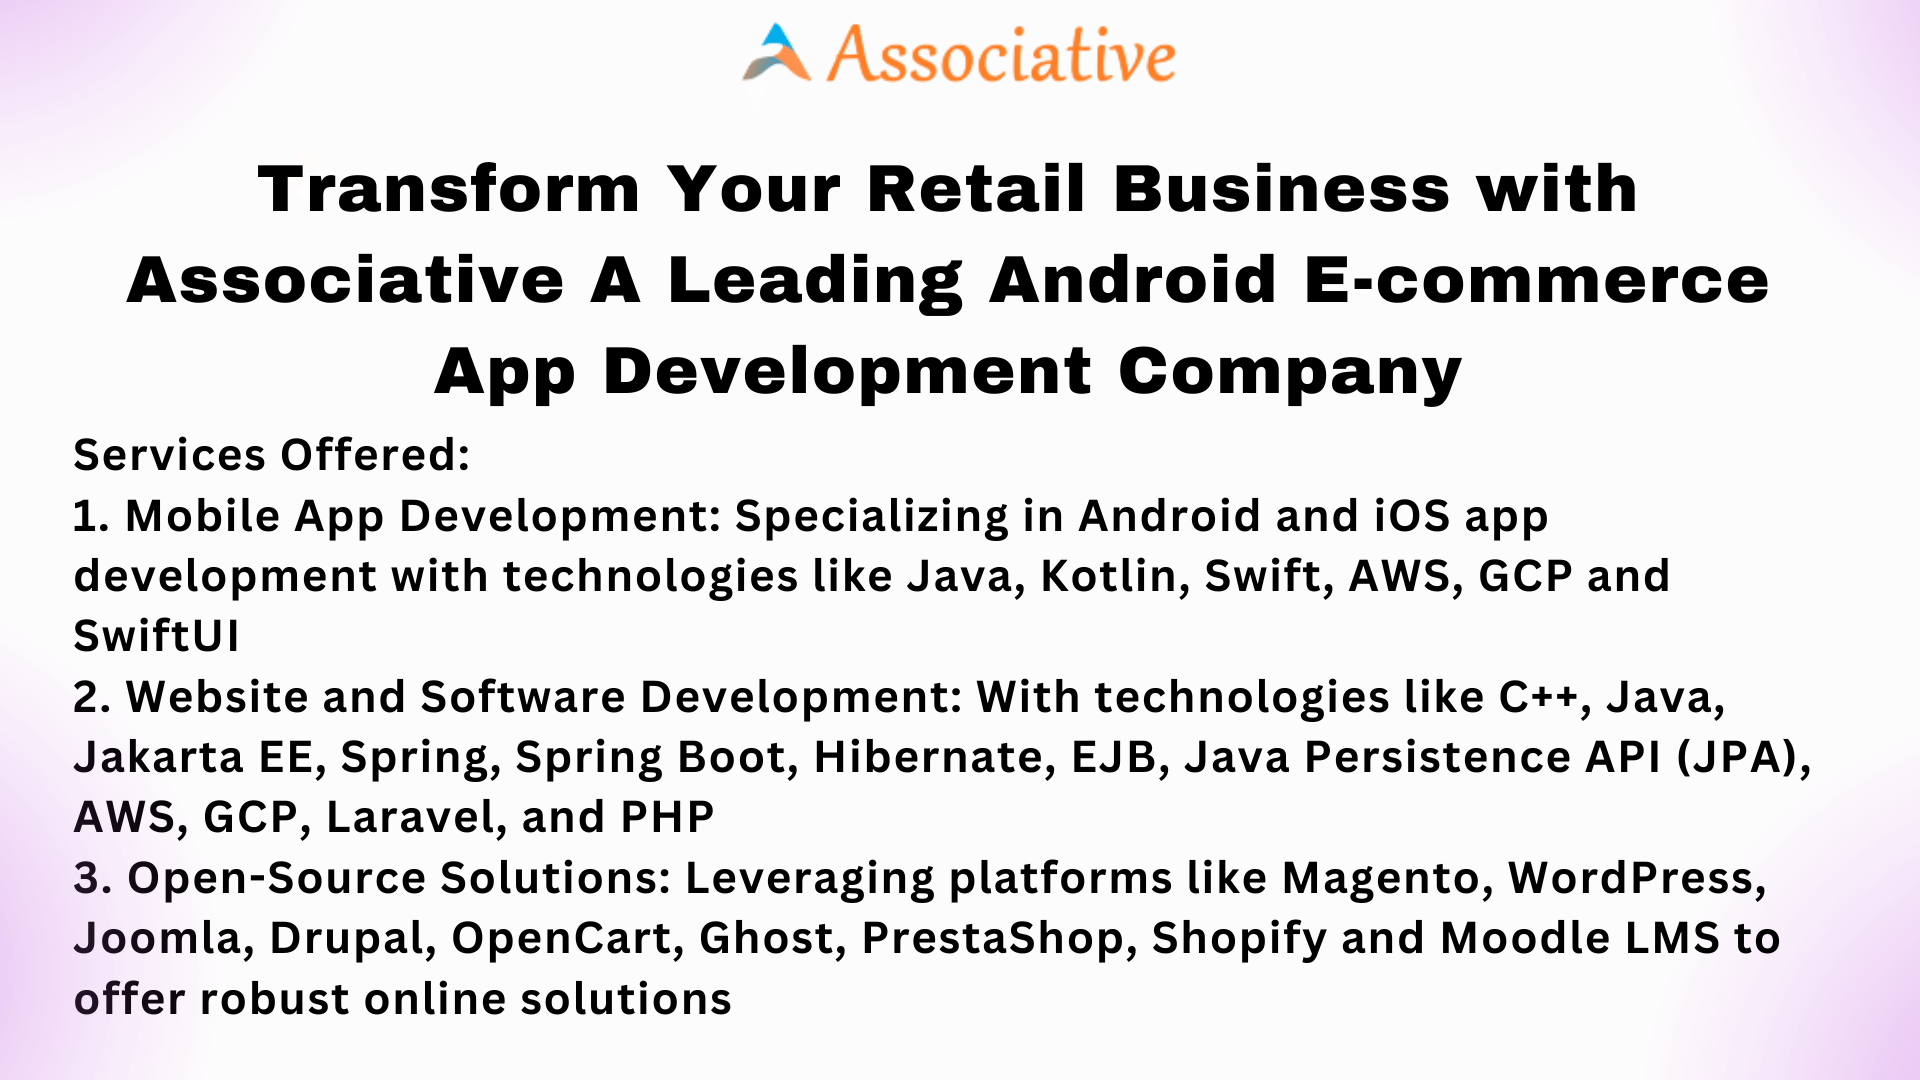 Transform Your Retail Business with Associative A Leading Android E-commerce App Development Company